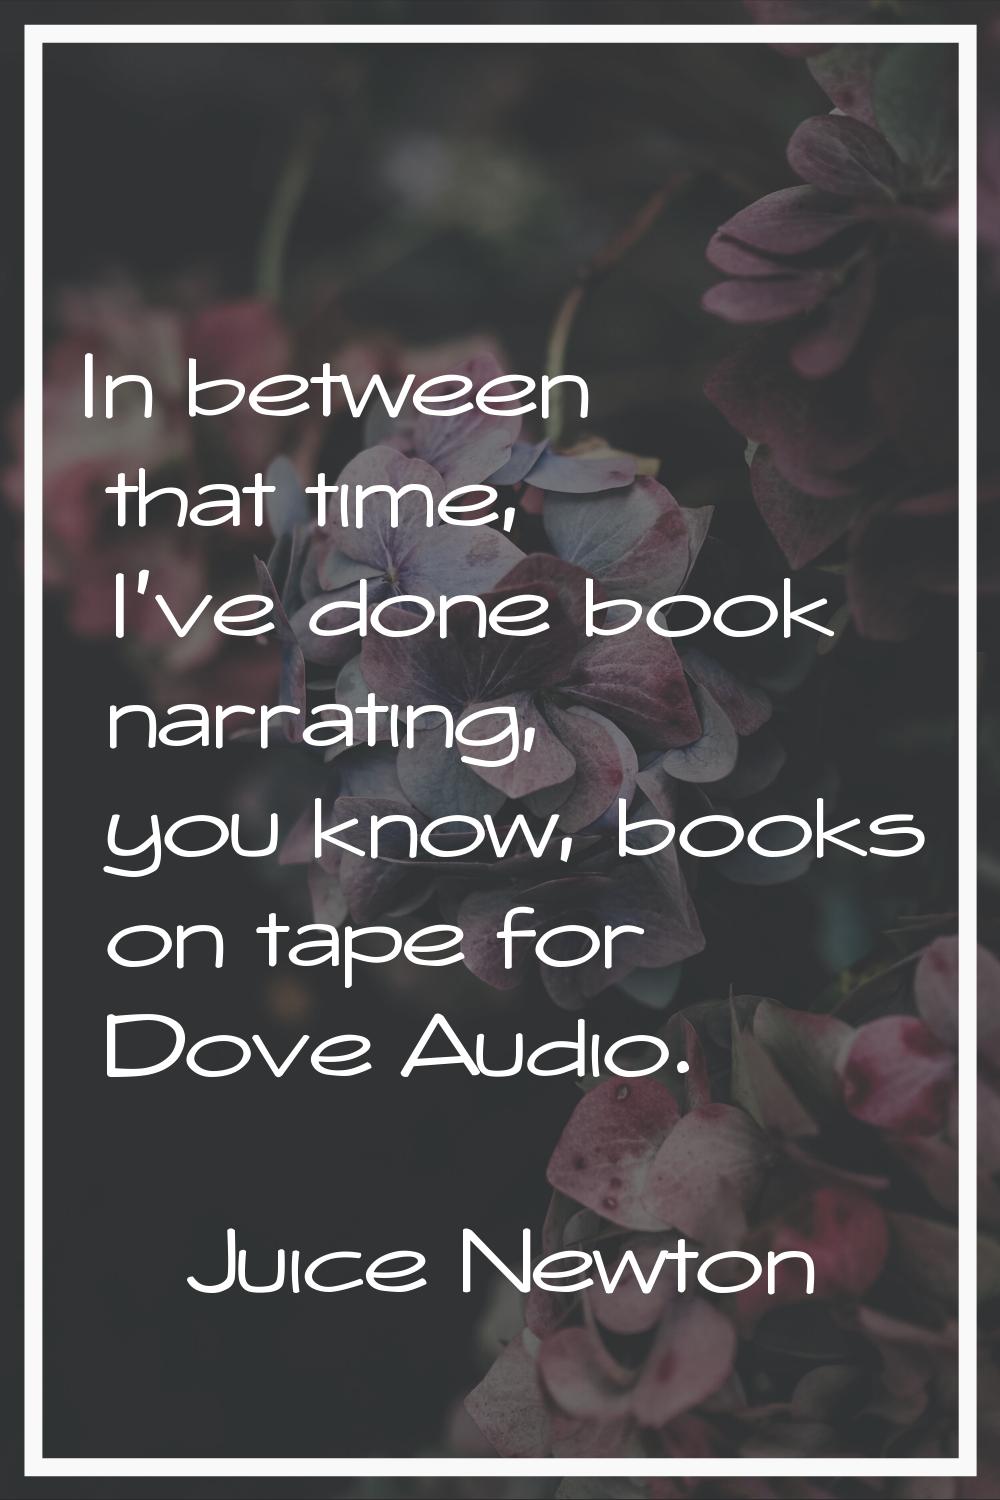 In between that time, I've done book narrating, you know, books on tape for Dove Audio.